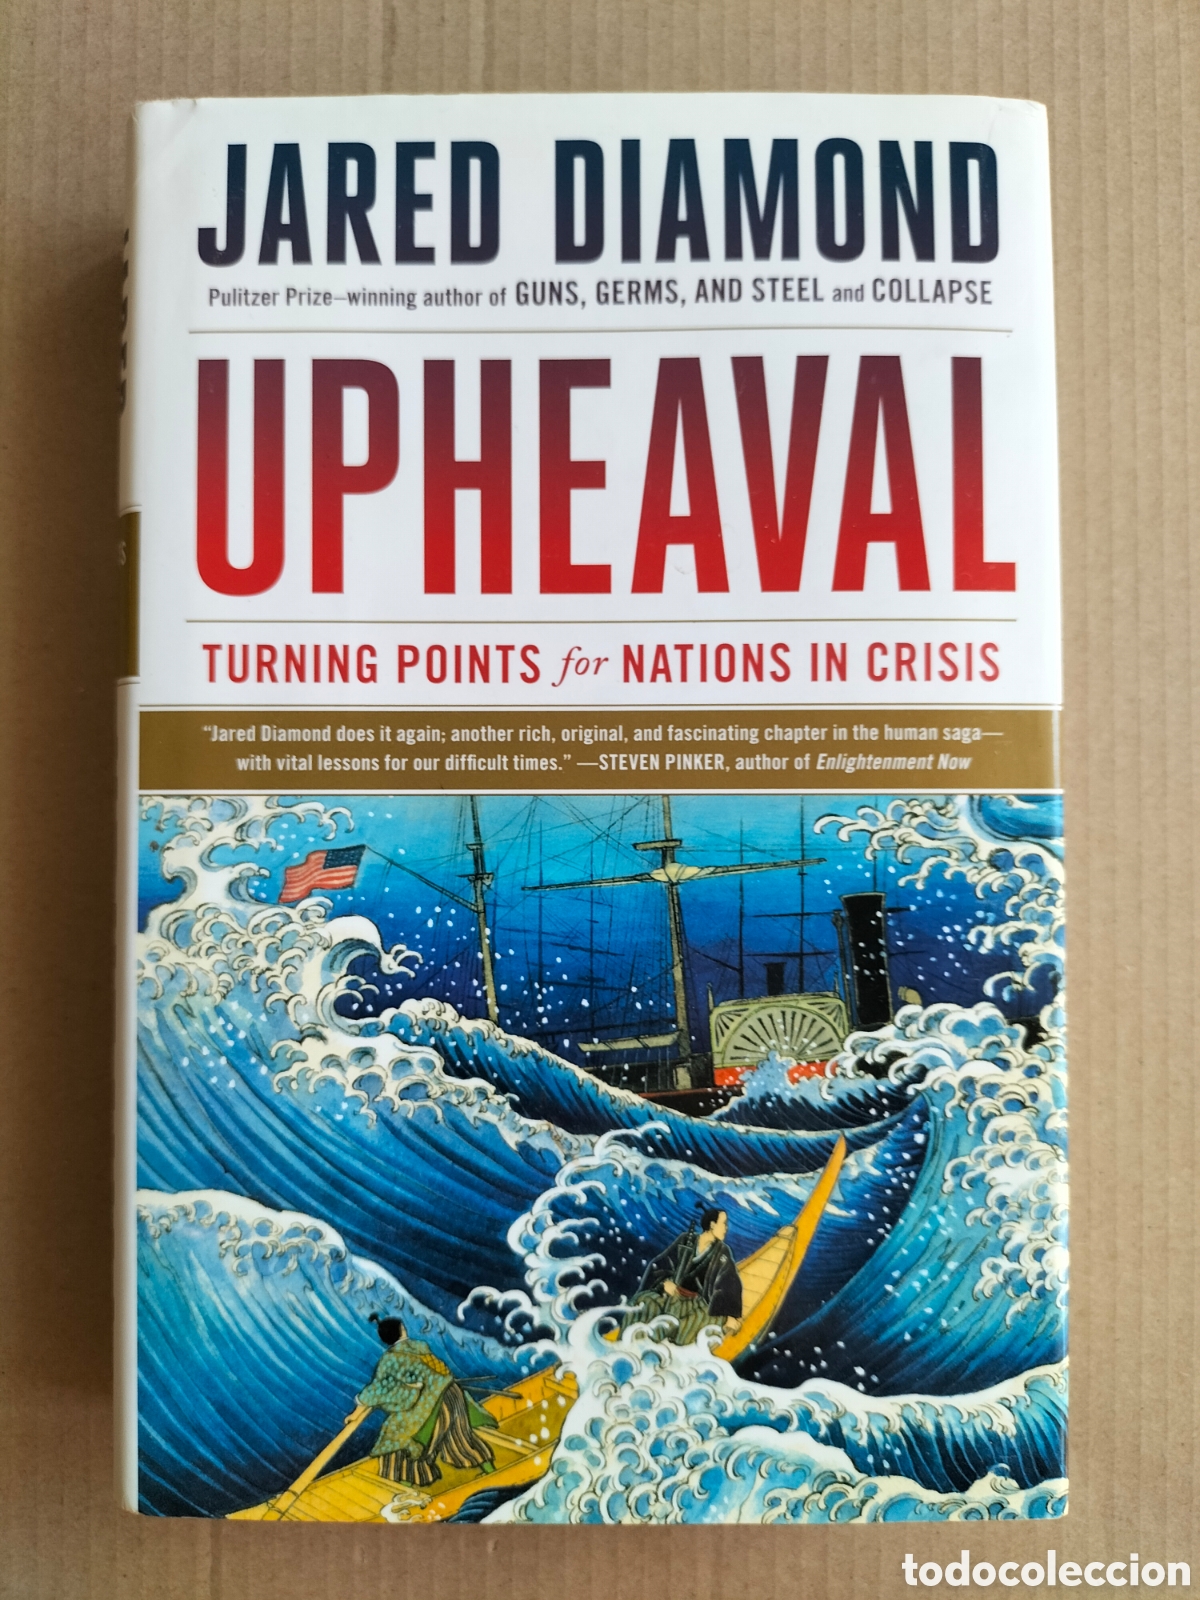 Compra　points　todocoleccion　in　upheaval.　nations　crisis.　turning　en　for　venta